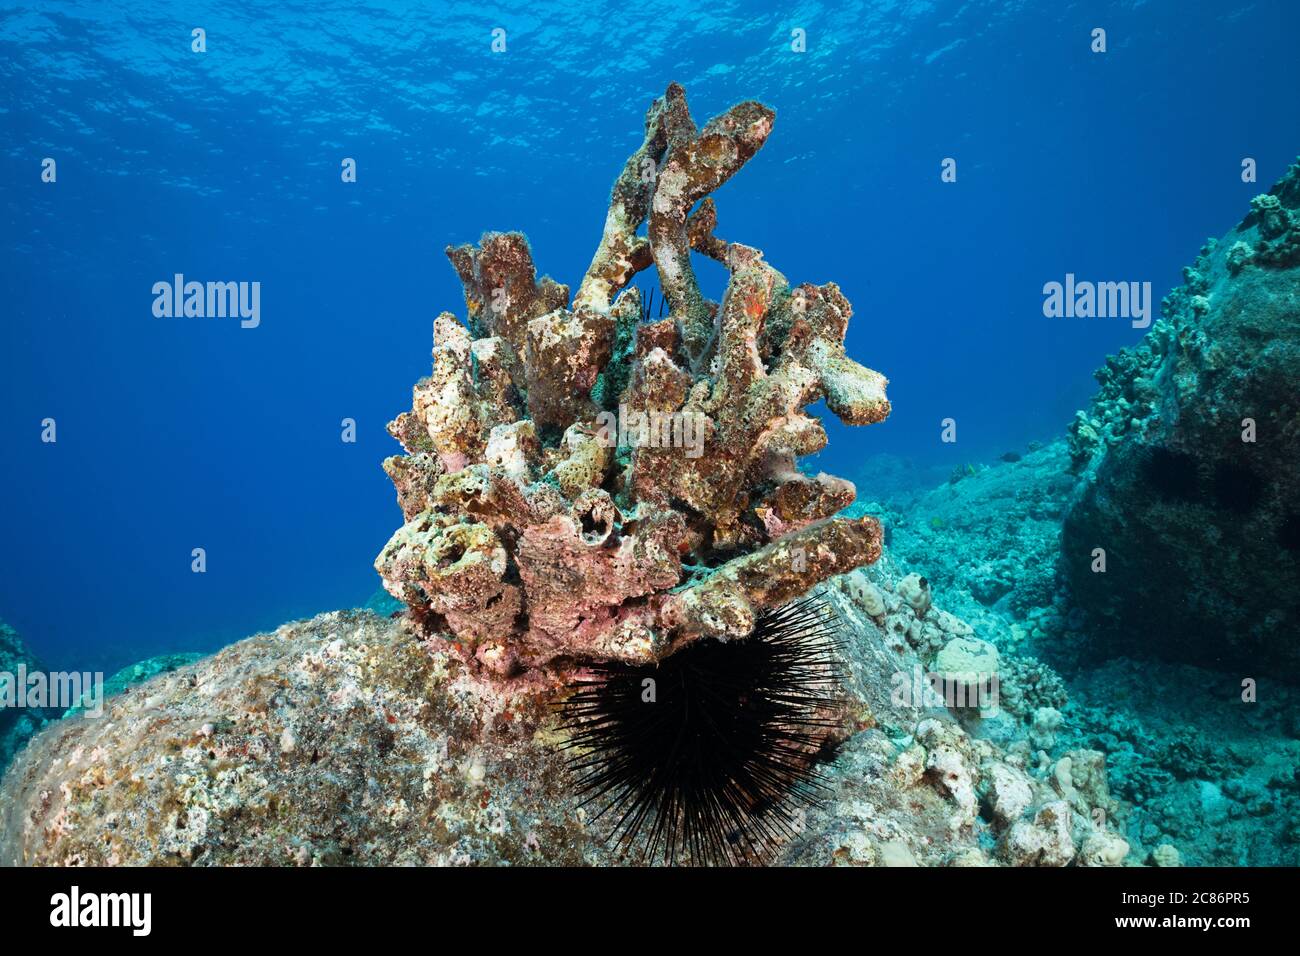 a black spiny sea urchin shelters under the skeleton of an antler coral colony, Pocillopora grandis, that has bleached and died due to warm seawater Stock Photo